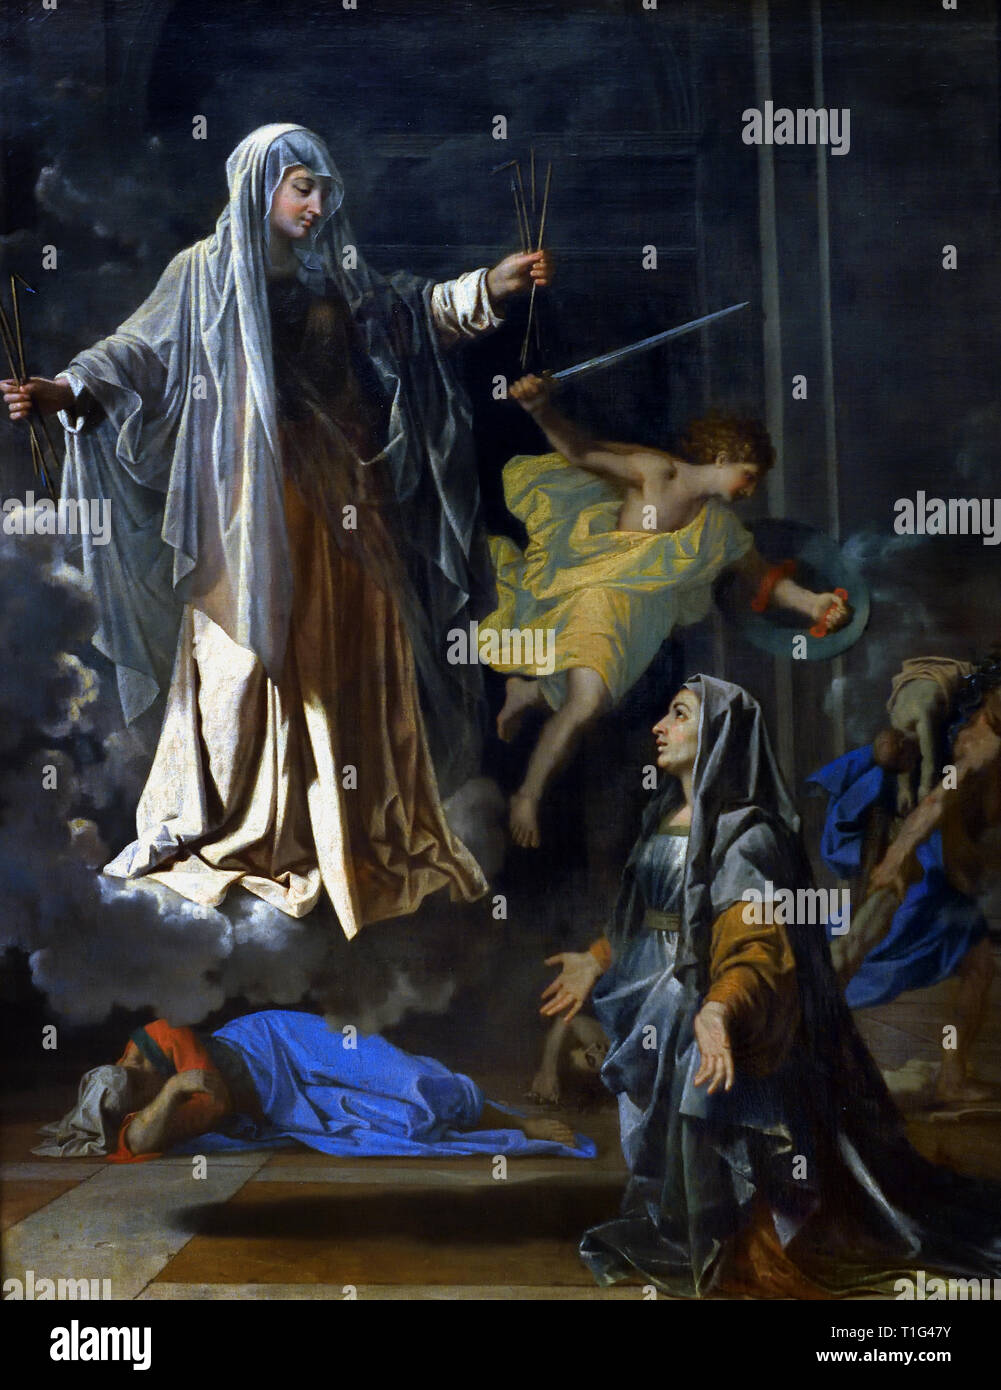 Saint Frances of Rome ( 1657) Nicolas Poussin 1594-1665 France French ( Frances of Rome, was a common wife, mother, mystic, organizer of charitable services. without religious vows.) Stock Photo